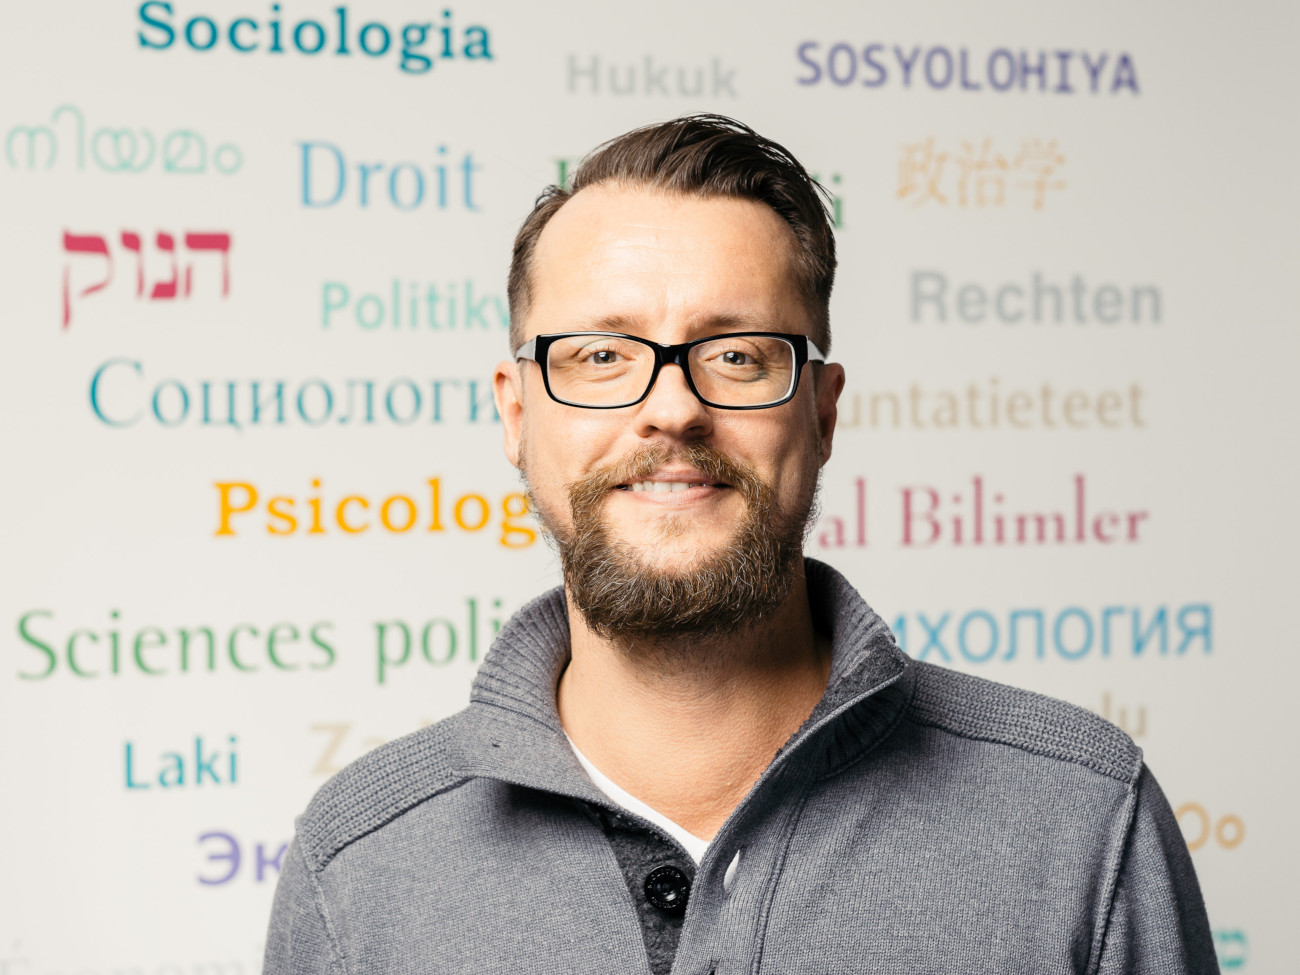 Christian Peters stands in front of a wall with colorful lettering from the social sciences in different languages.